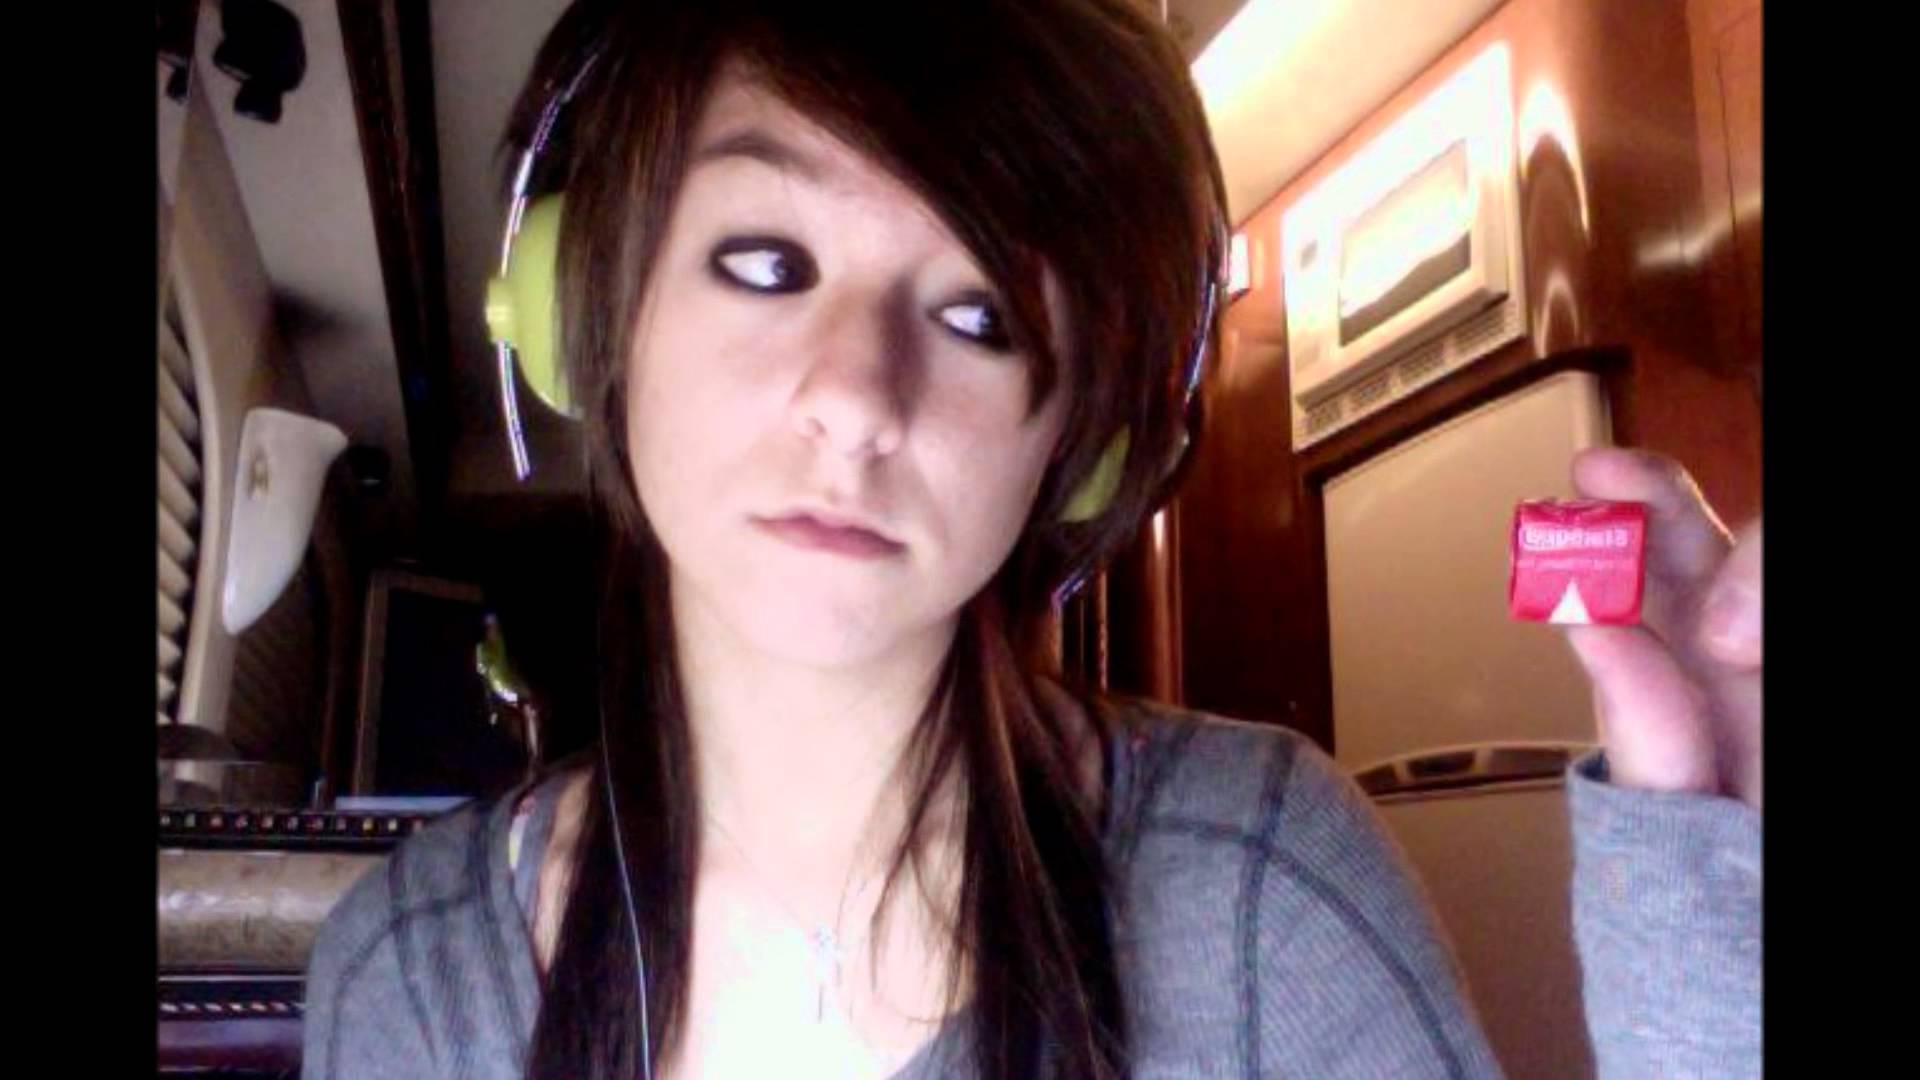 Our Favorite Christina Grimmie Pictures - YouTube